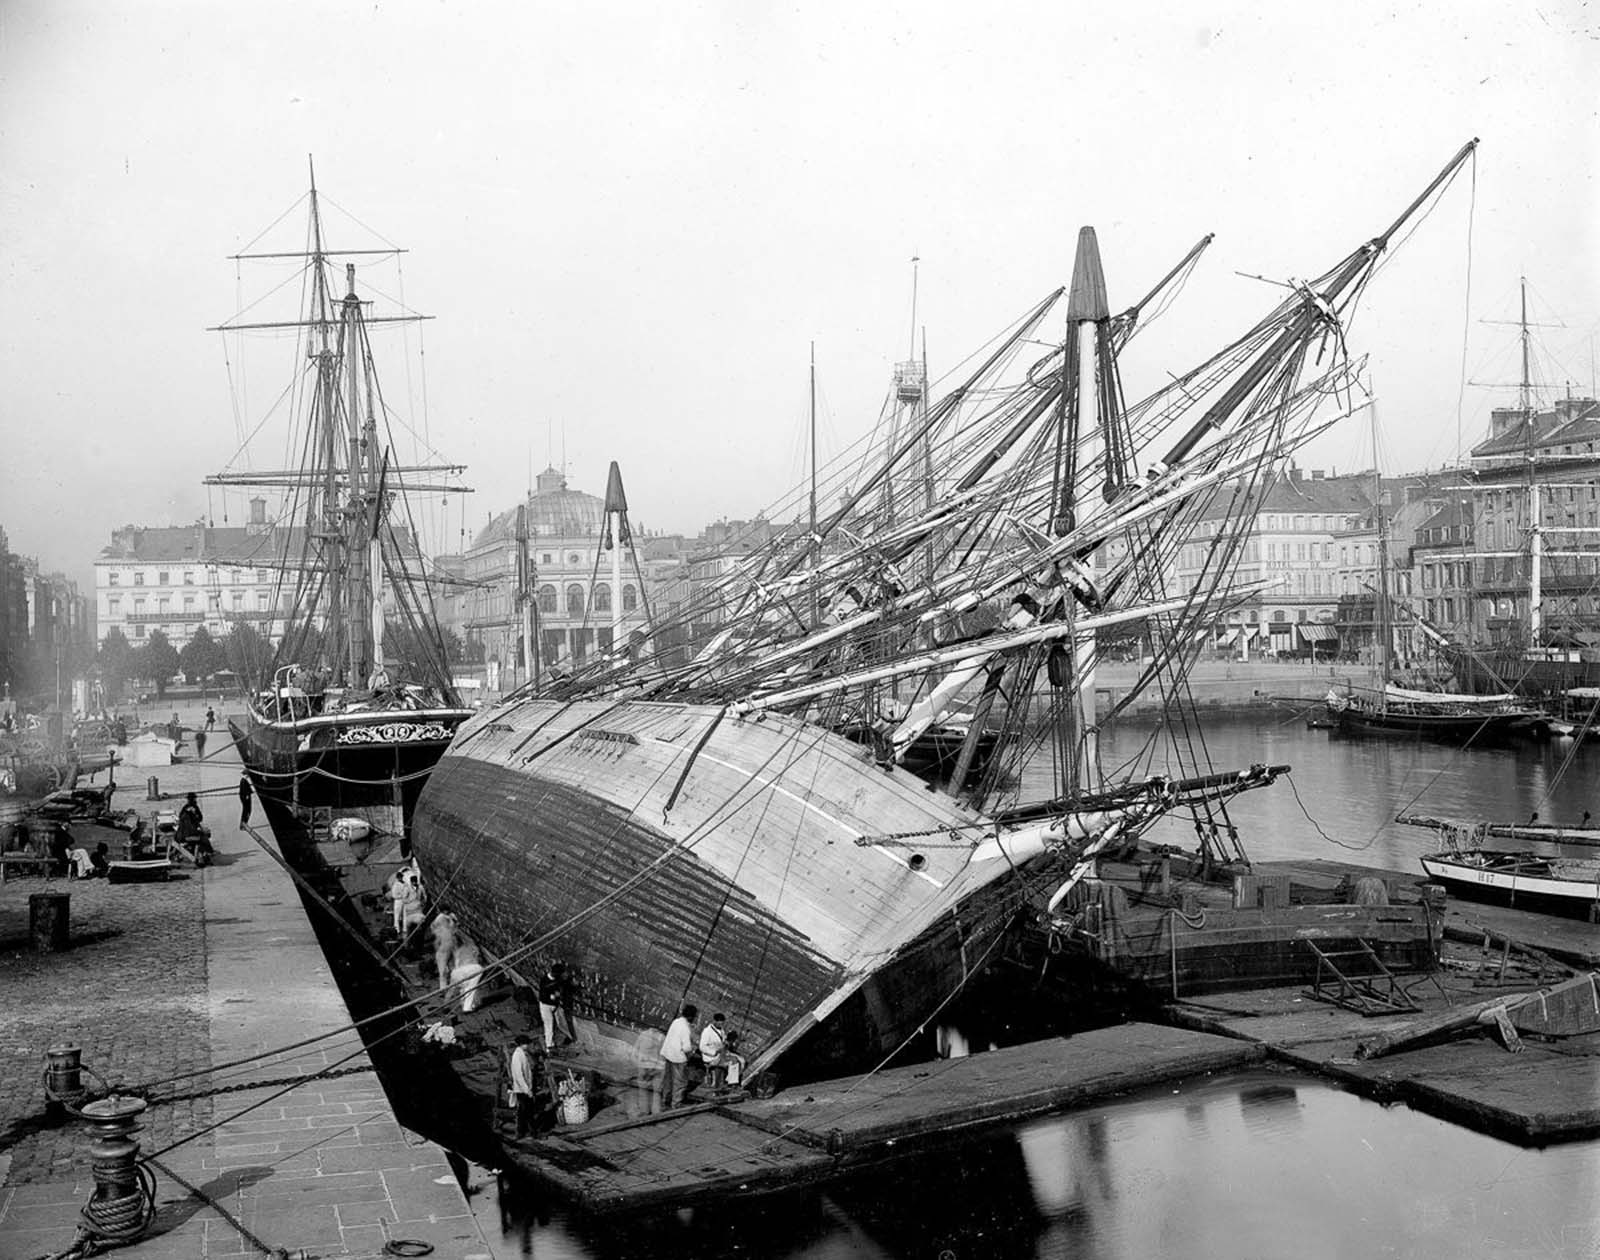 A ship’s hull is repaired in dry dock in France, 1890.